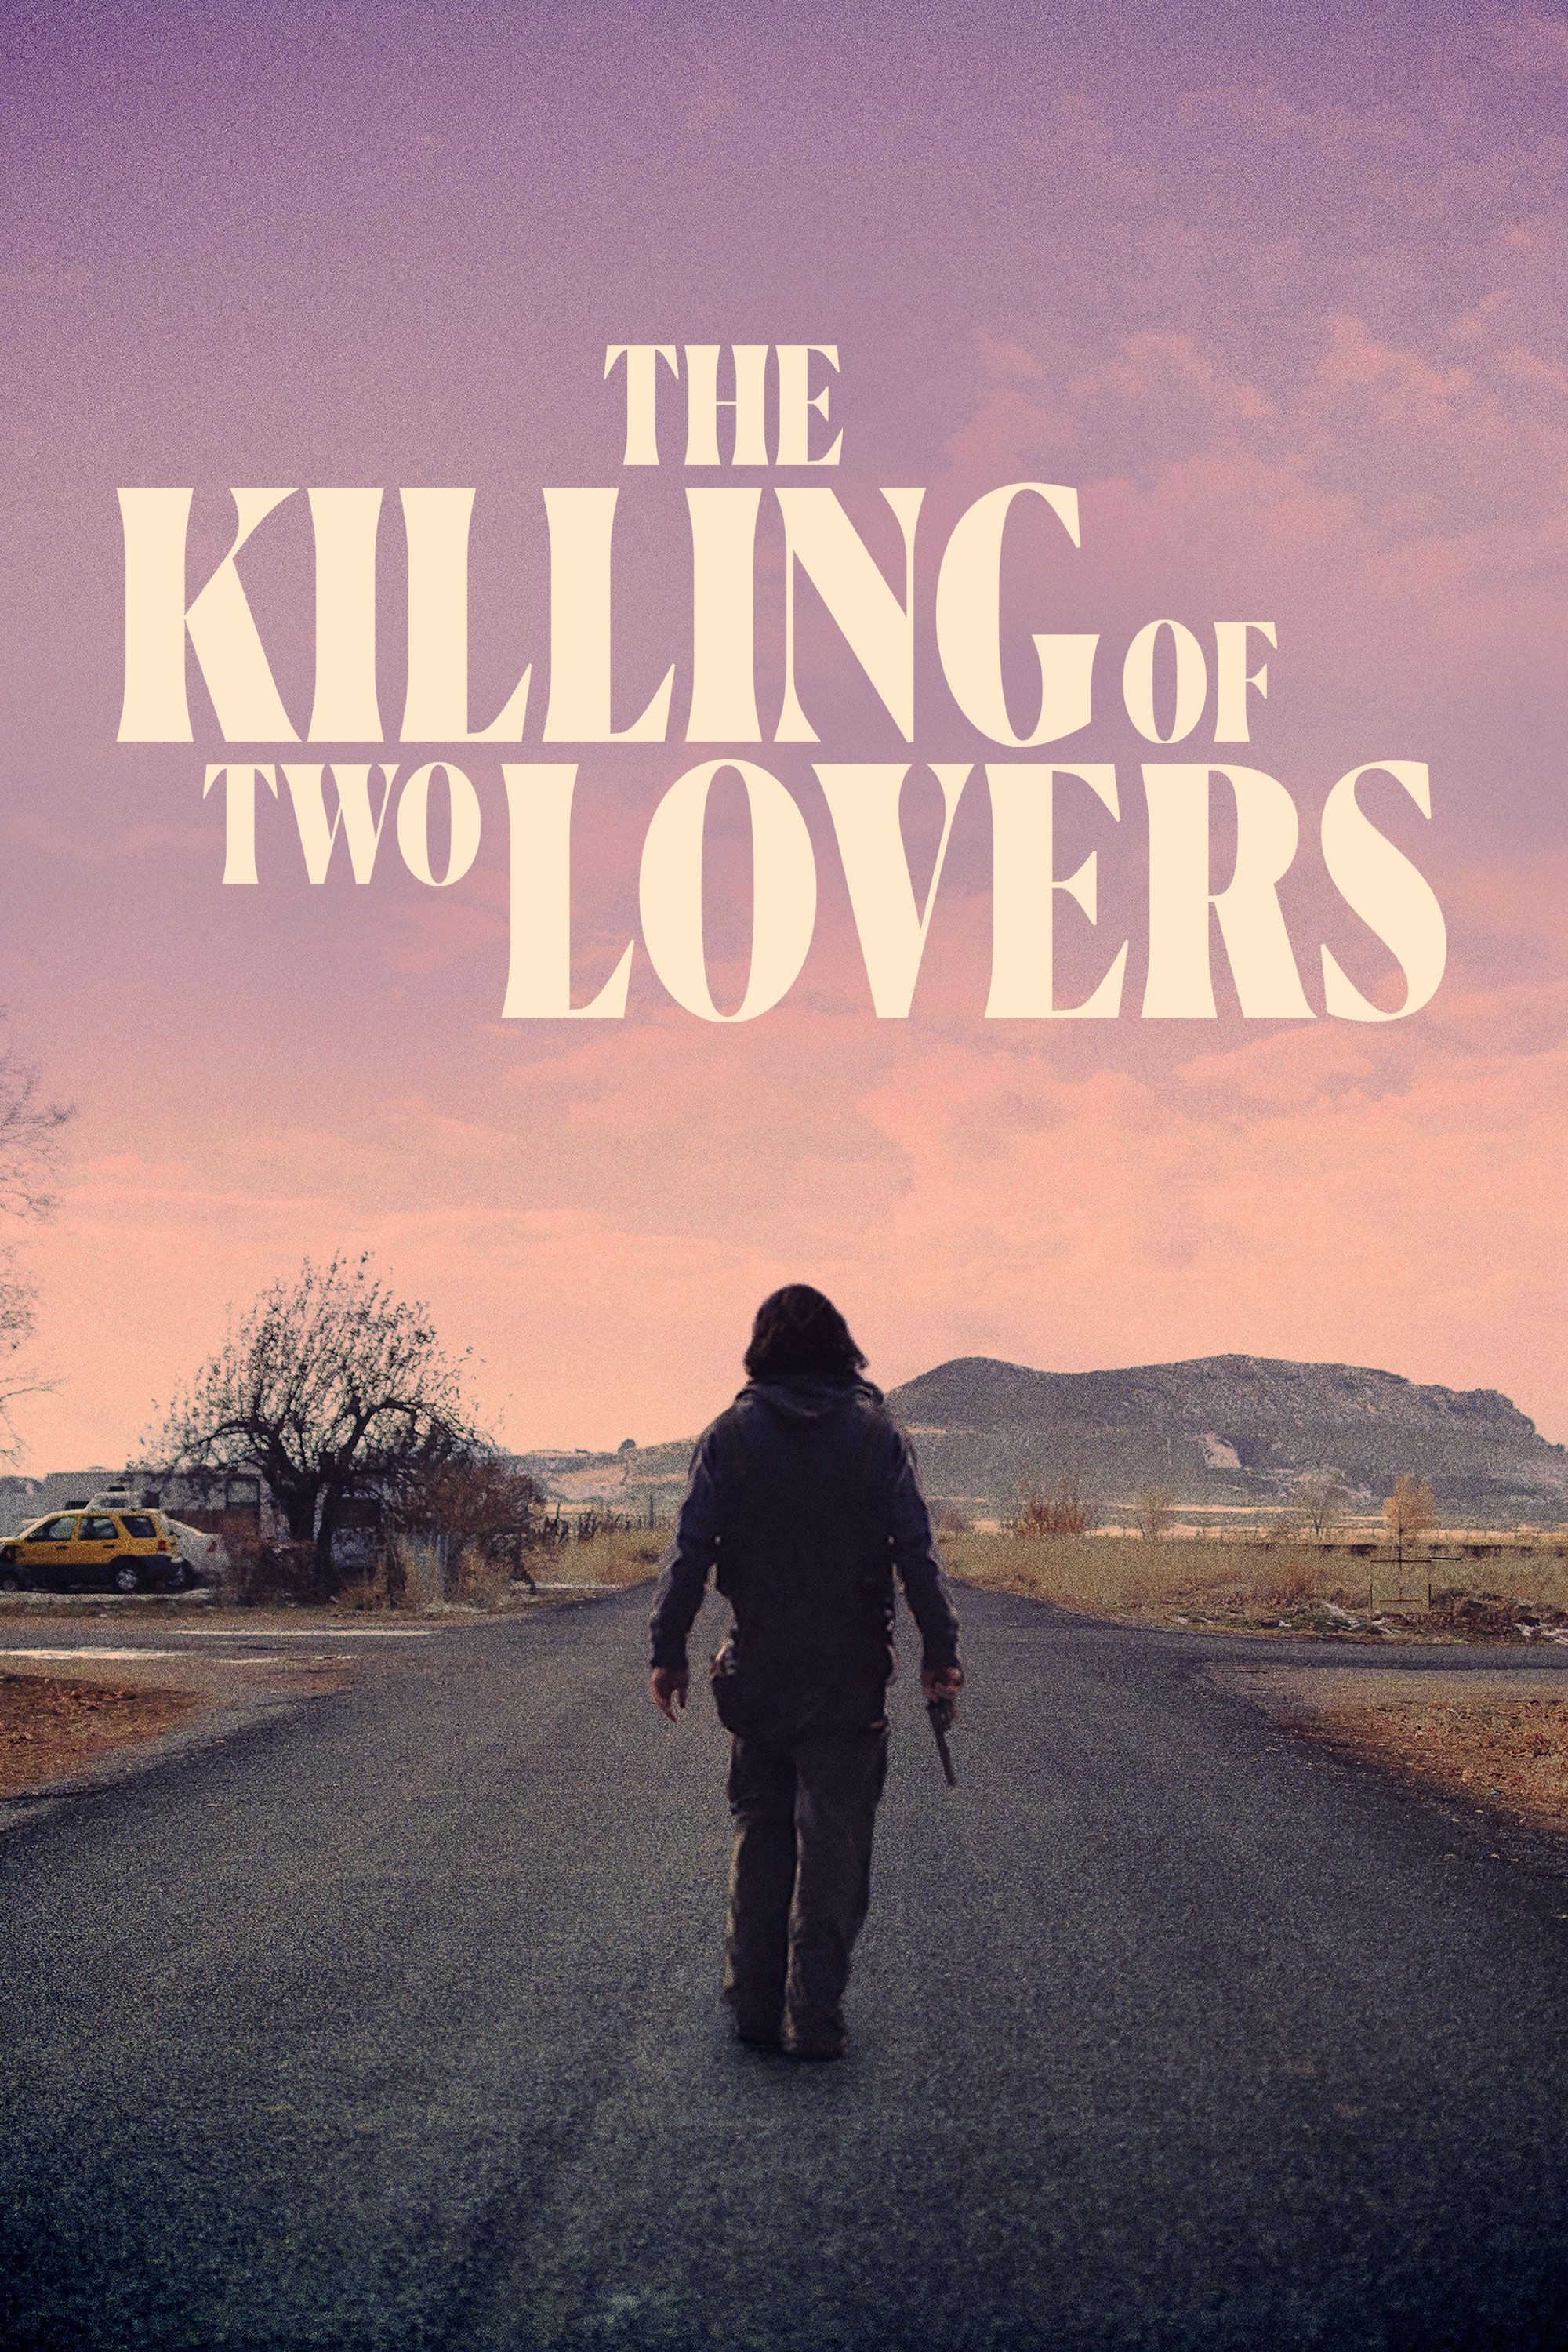 The Killing of Two Lovers, Indie movie, Relationship drama, Tense storyline, 2000x3000 HD Phone